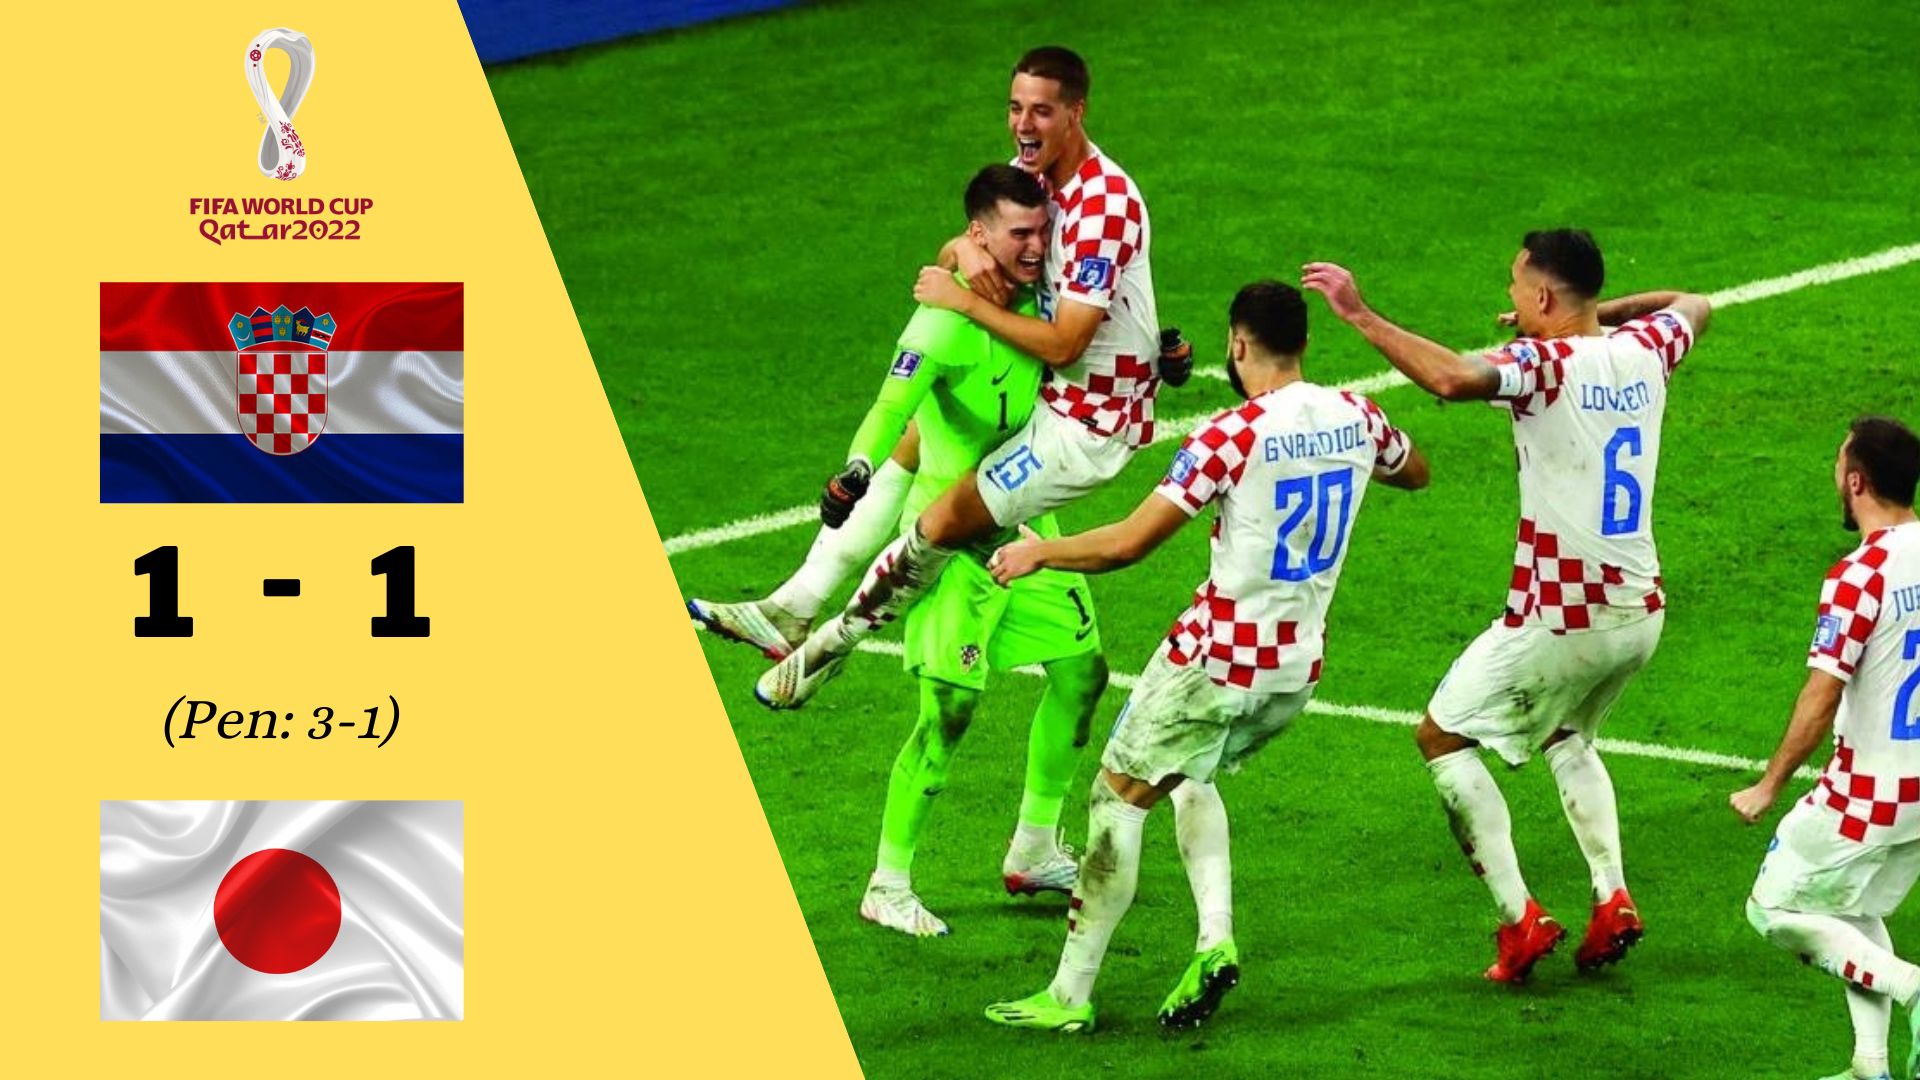 Croatia vs. Japan final score, result (World Cup 2022): The first penalty shootout sent Japan home.